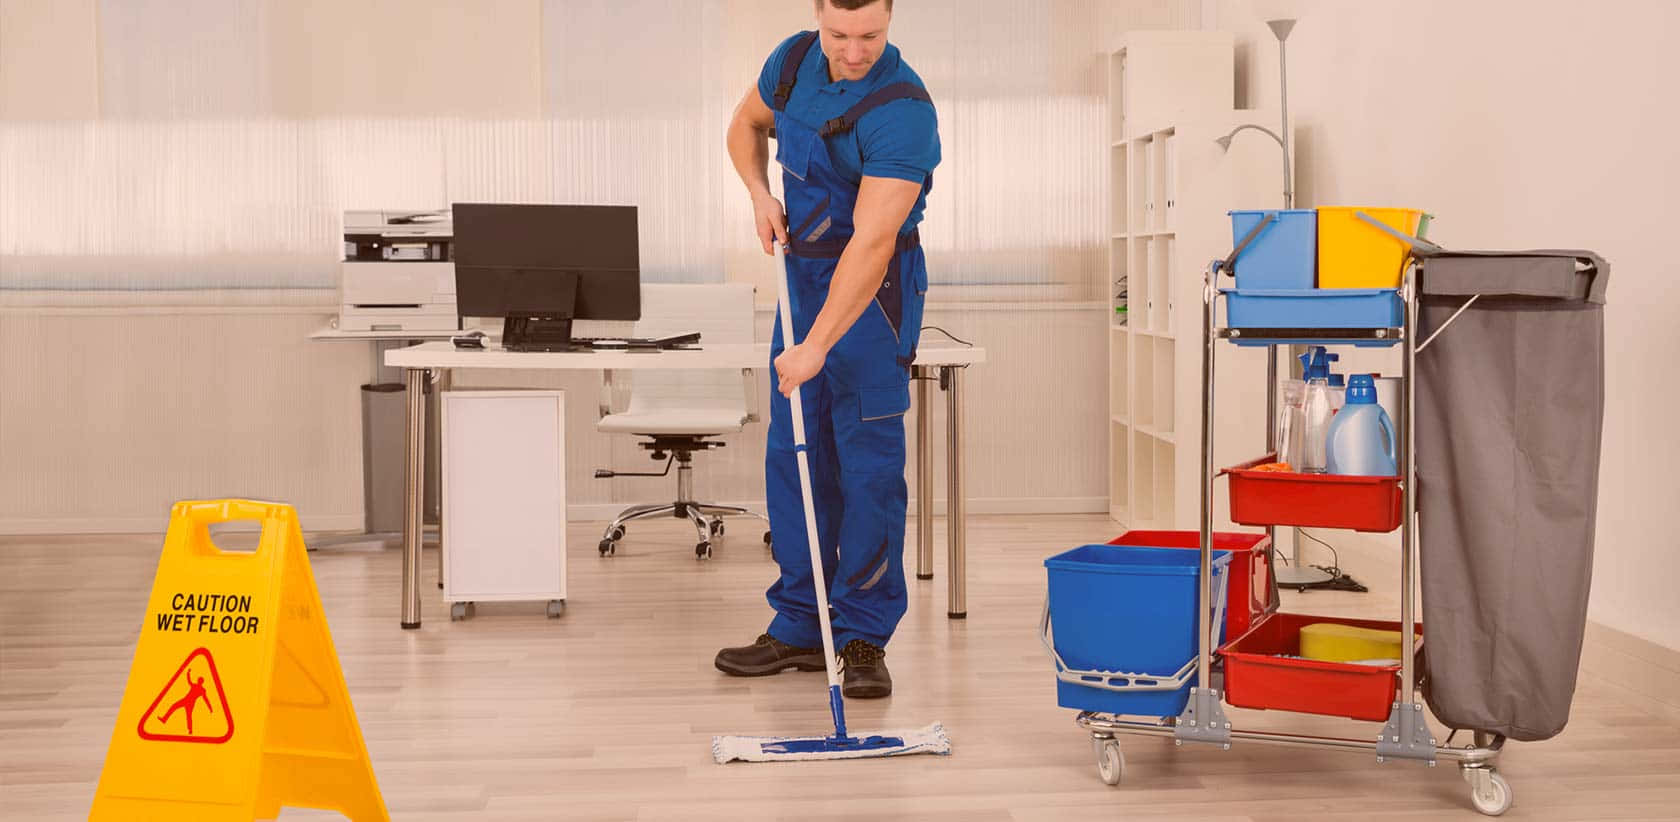 Worker Cleaning Services Wallpaper